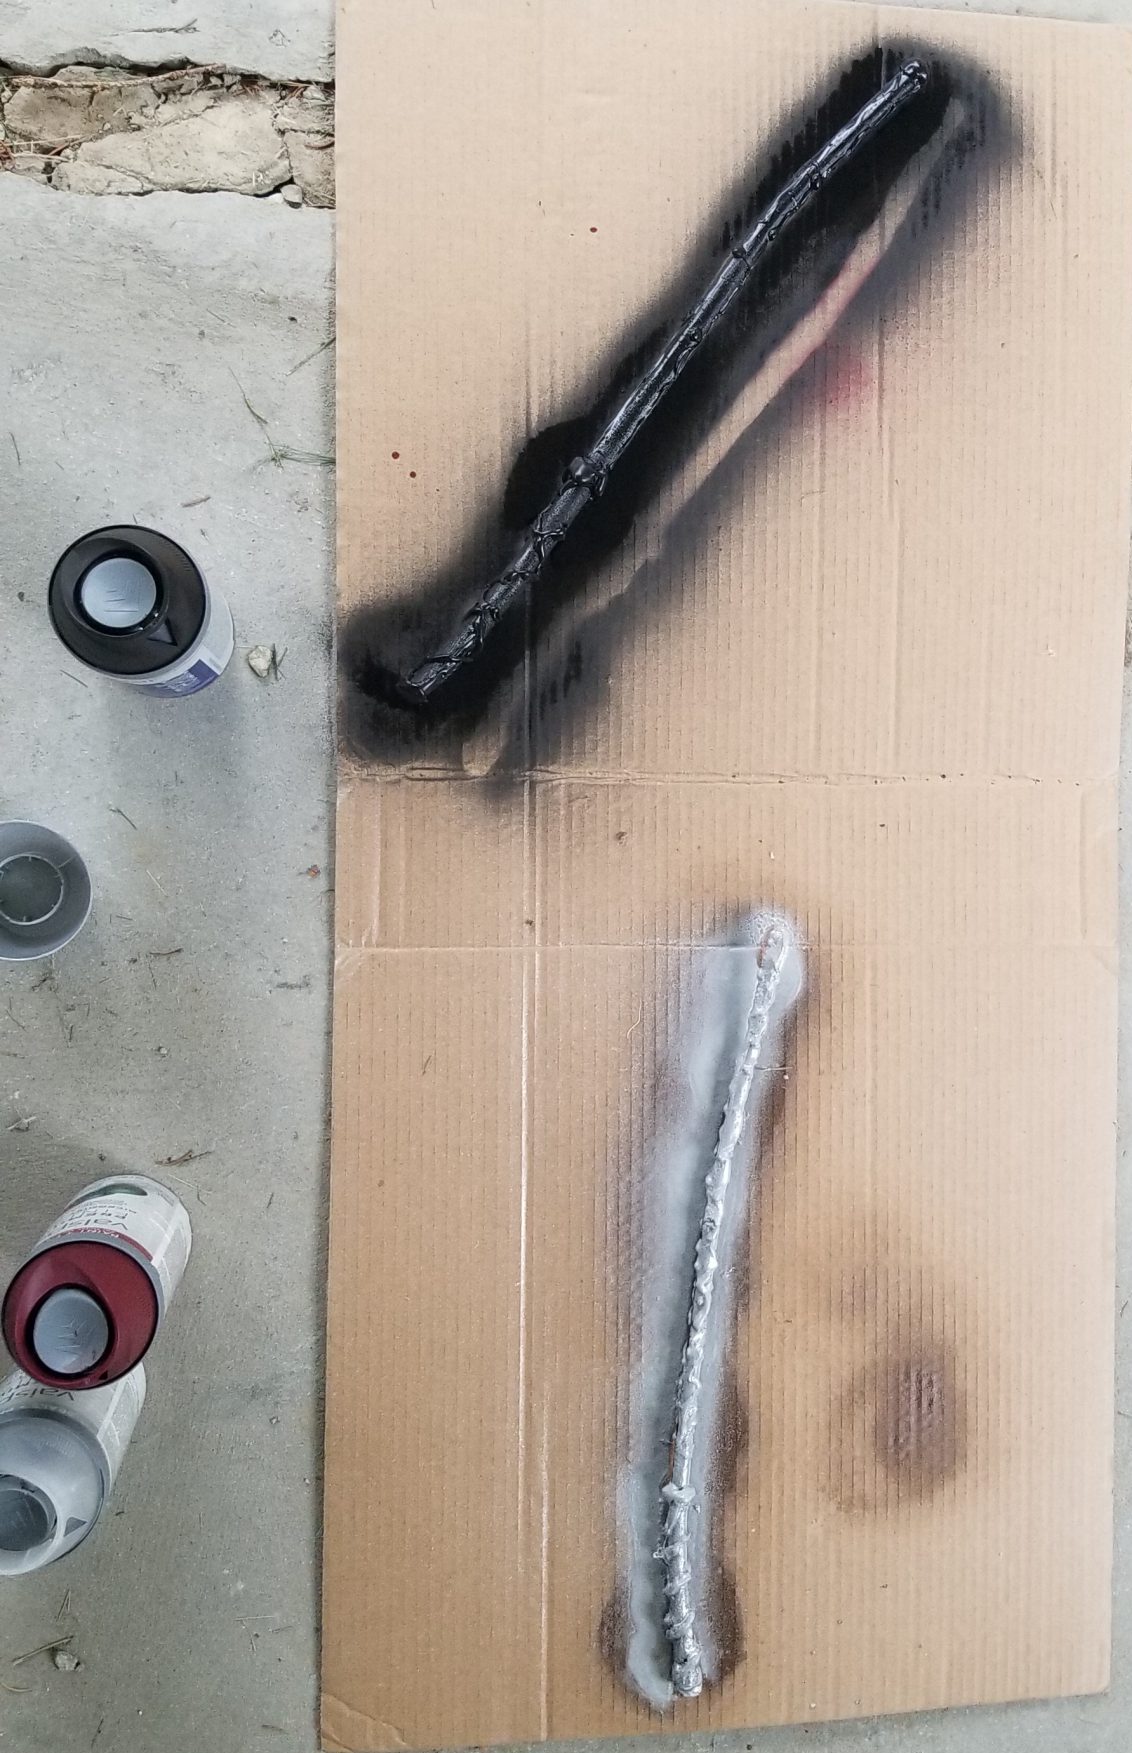 two sticks with hot glue painted and laying on a piece of cardboard